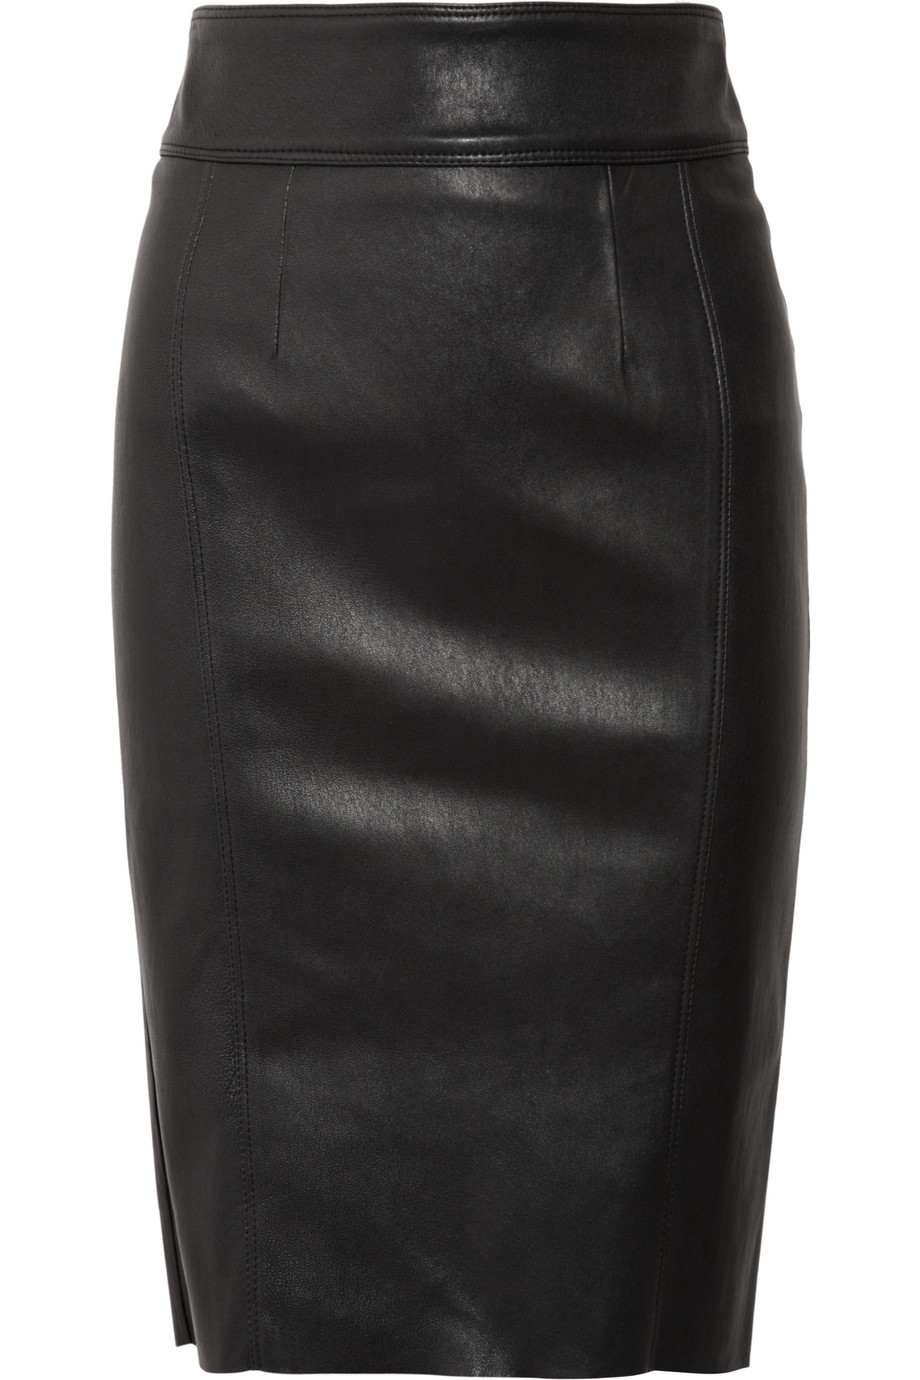 Burberry Stretch-leather Pencil Skirt in Black | Lyst